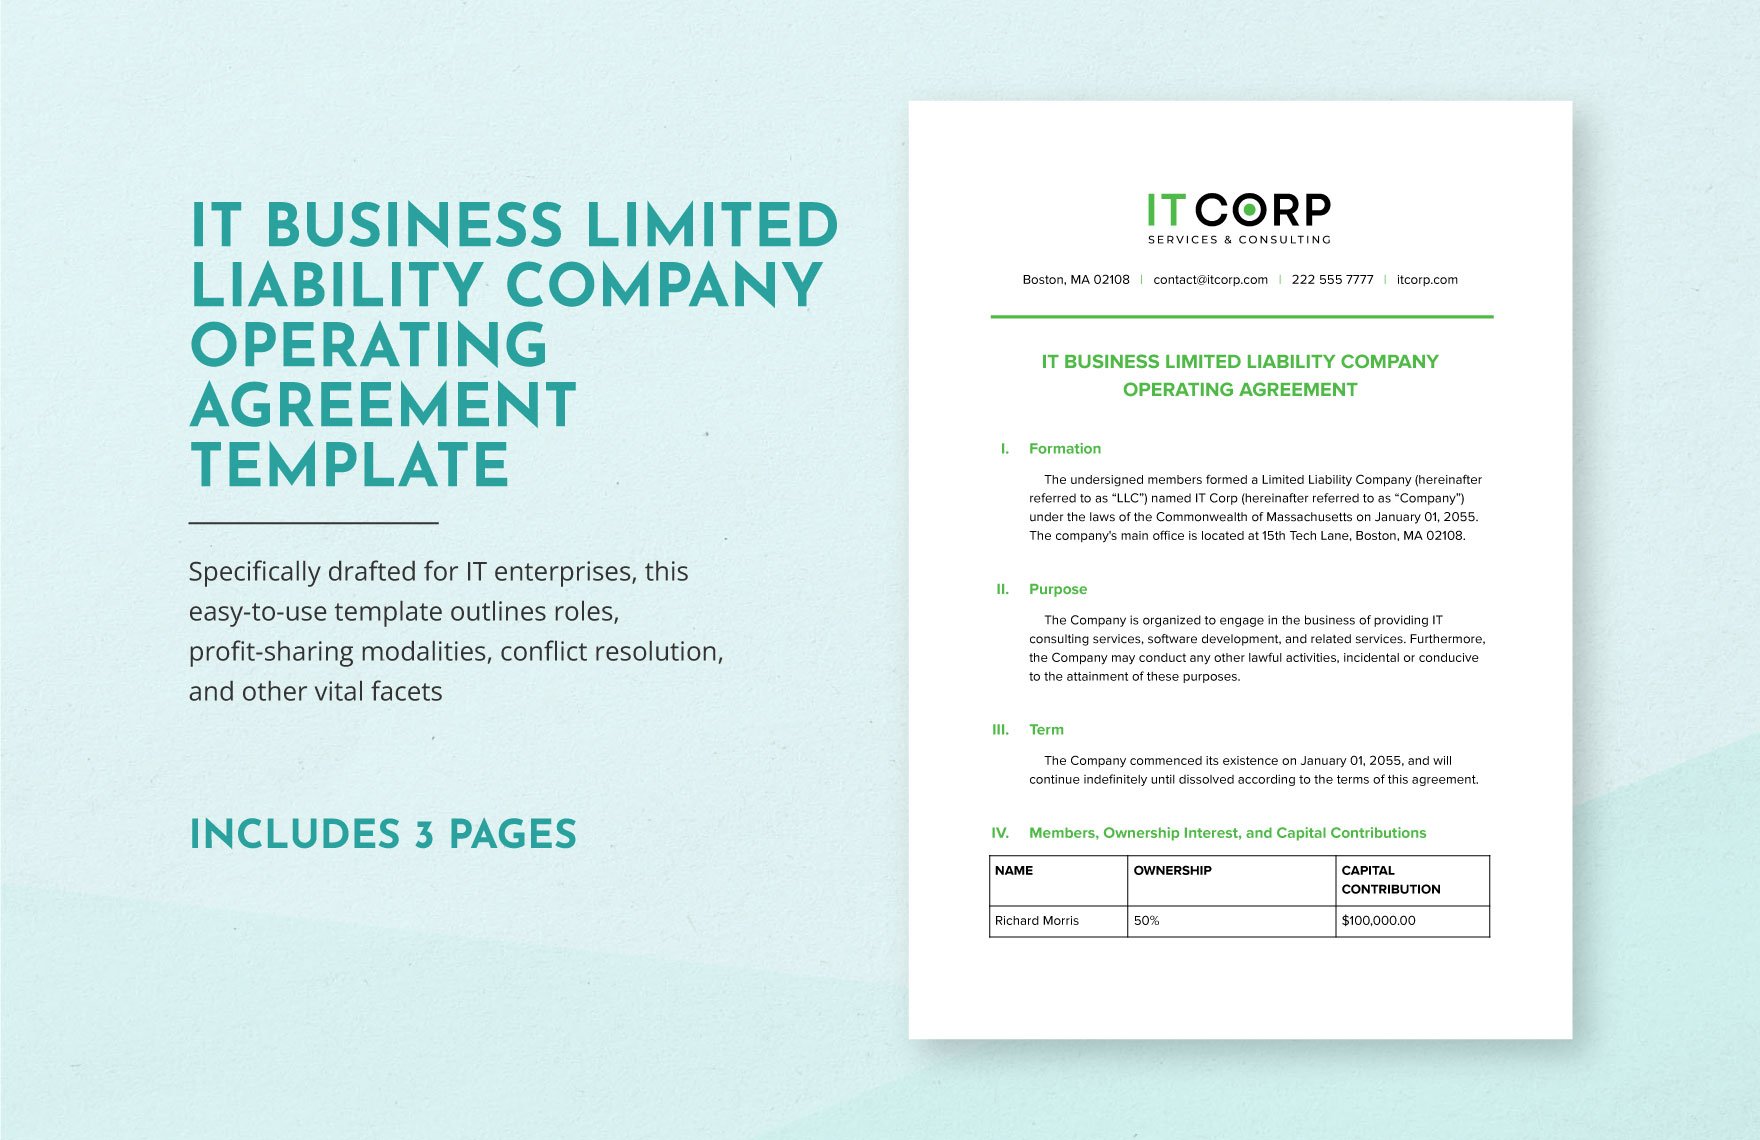 IT Business Limited Liability Company Operating Agreement Template